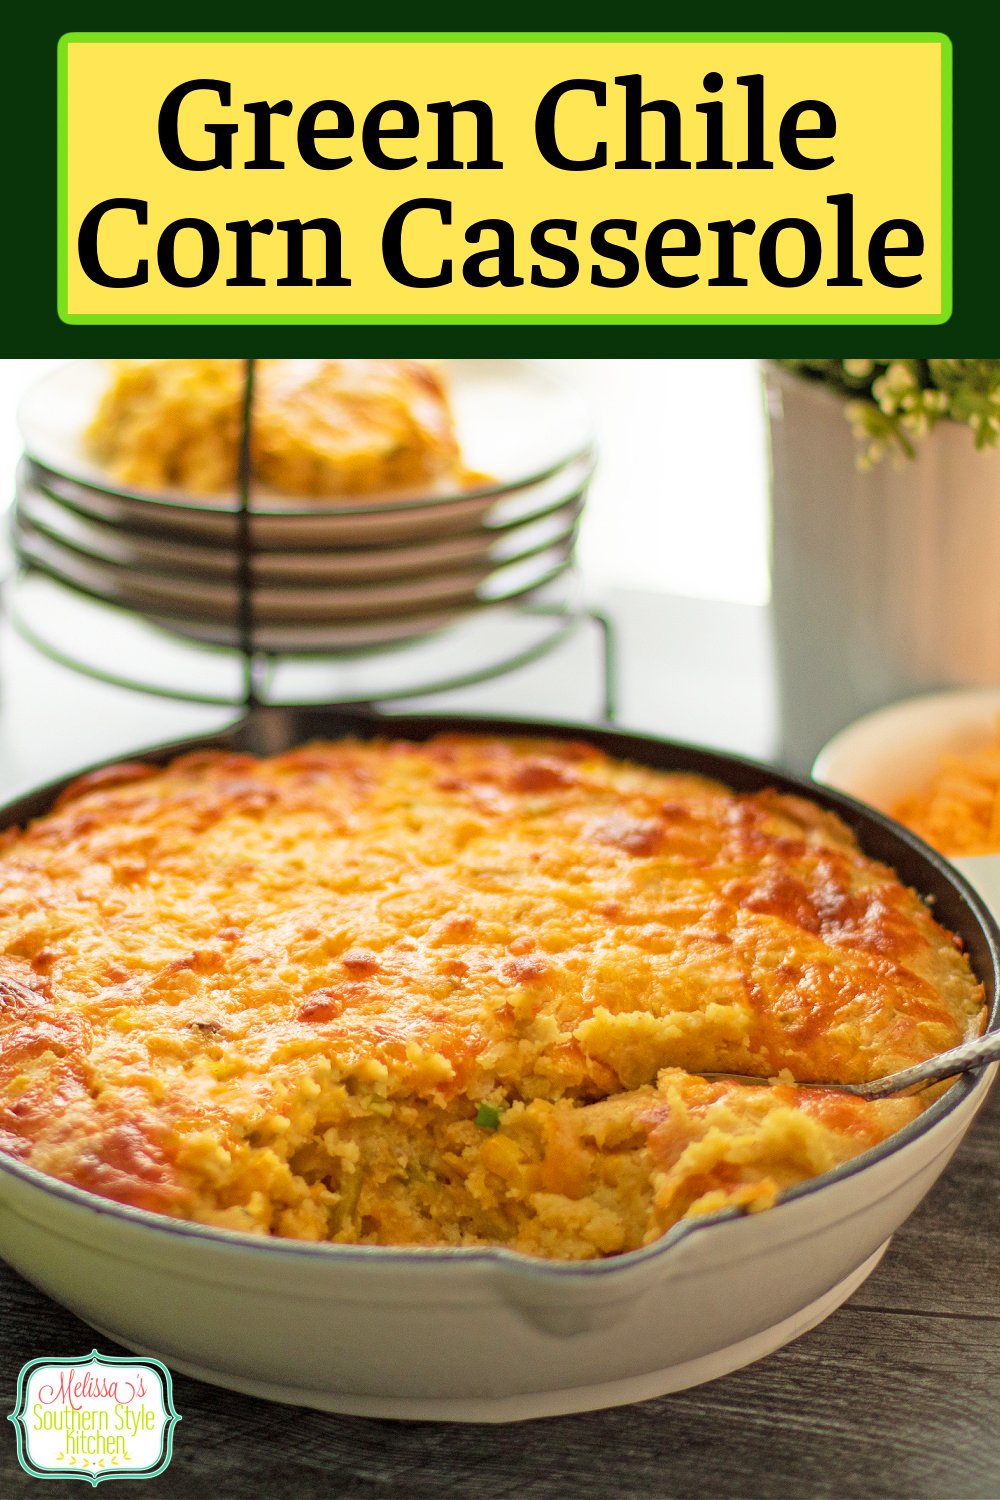 Serve this easy Green Chile Corn Casserole alongside beans, soup or your favorite Mexican fare as the complementary side dish. #corn #corncasserole #greenchiles #greenchilecorncasserole #easycorncasserole #cornrecipe via @melissasssk